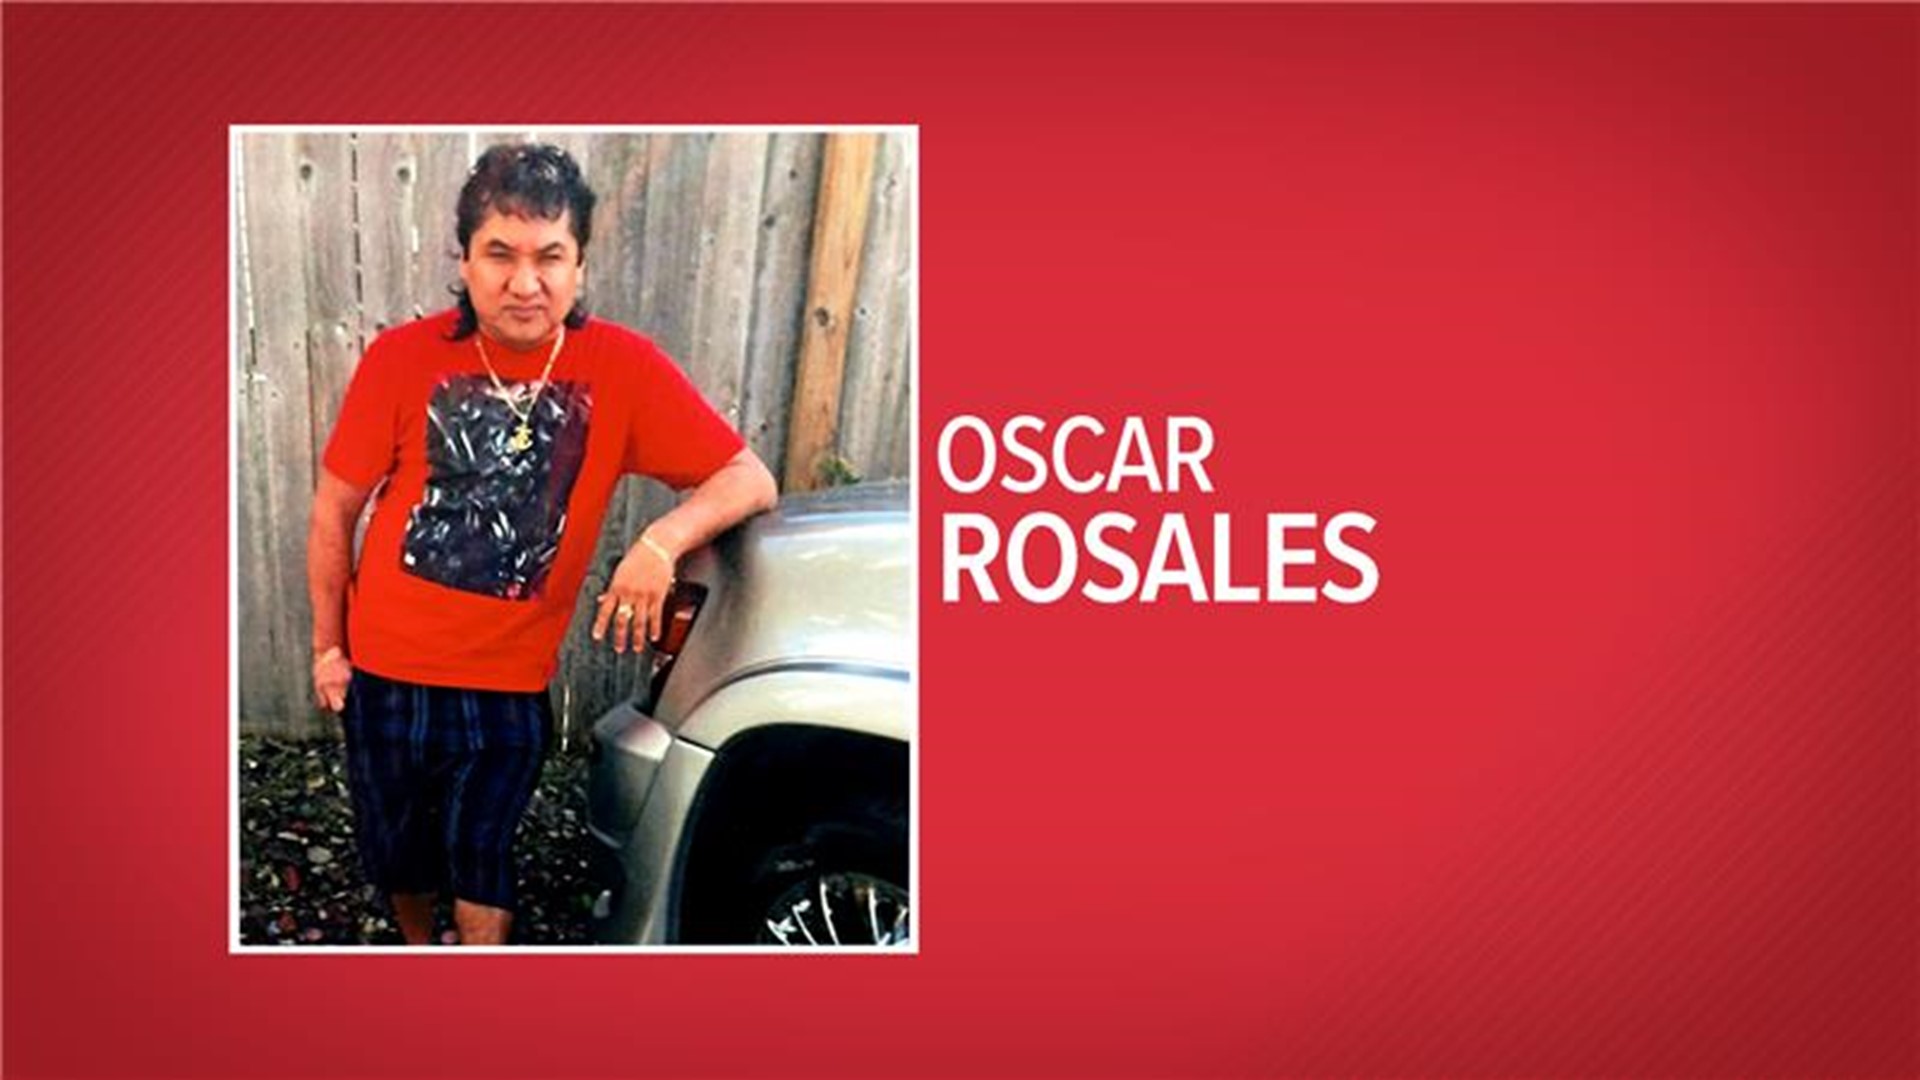 The US Marshal's Service and the Gulf Coast Violent Offenders Task Force, with the help of Mexican authorities, caught Rosales in Ciudad Acuña, across from Del Rio.